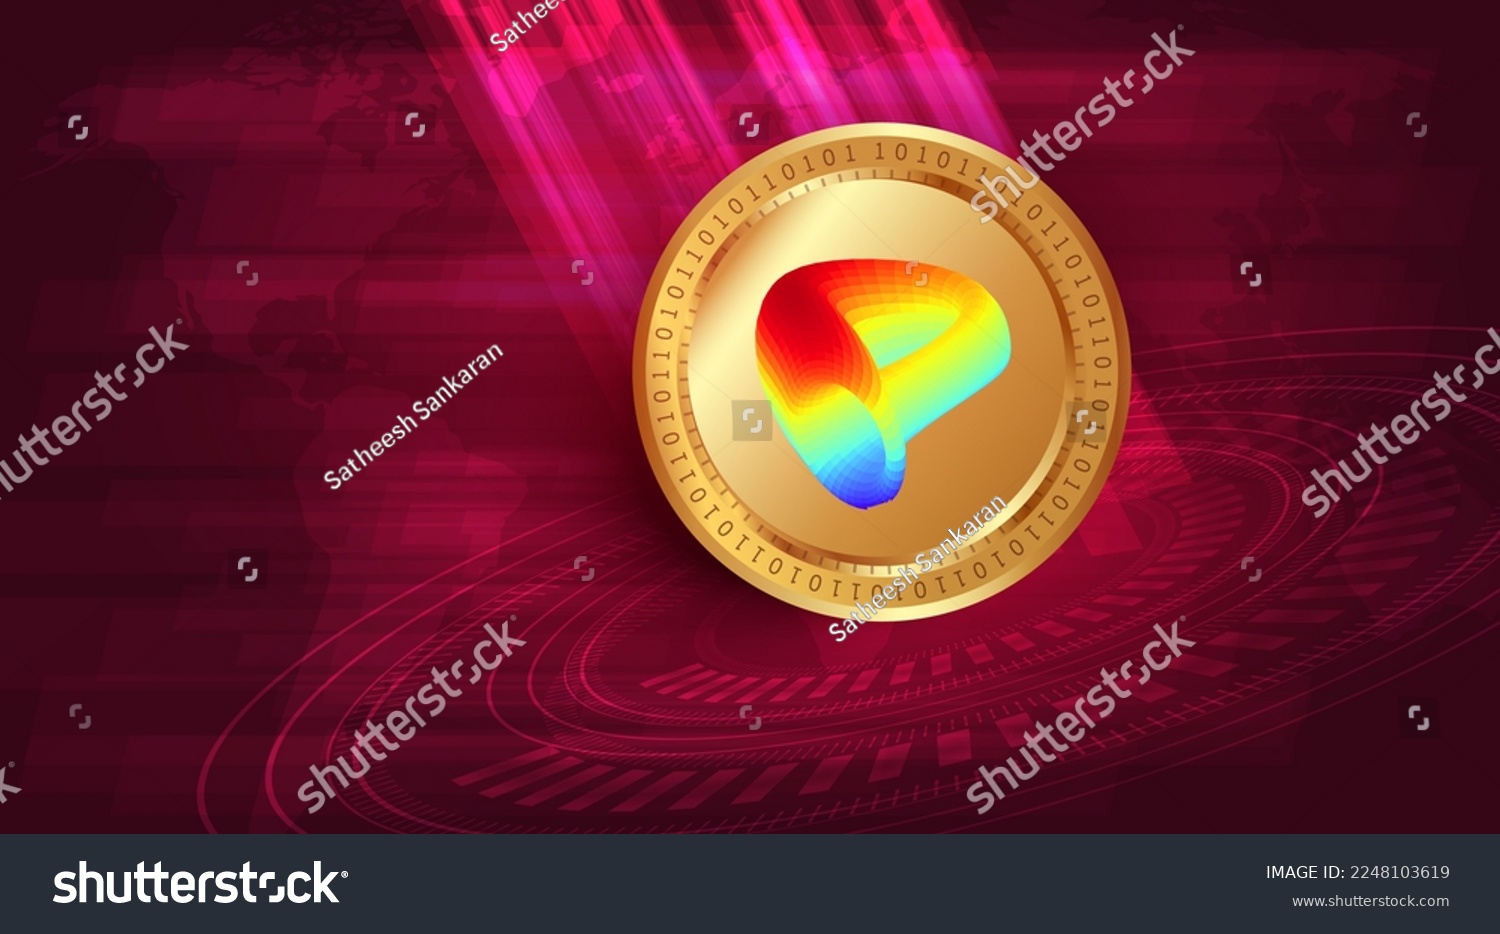 SVG of Curve DAO Token (CRV) crypto currency banner and background svg